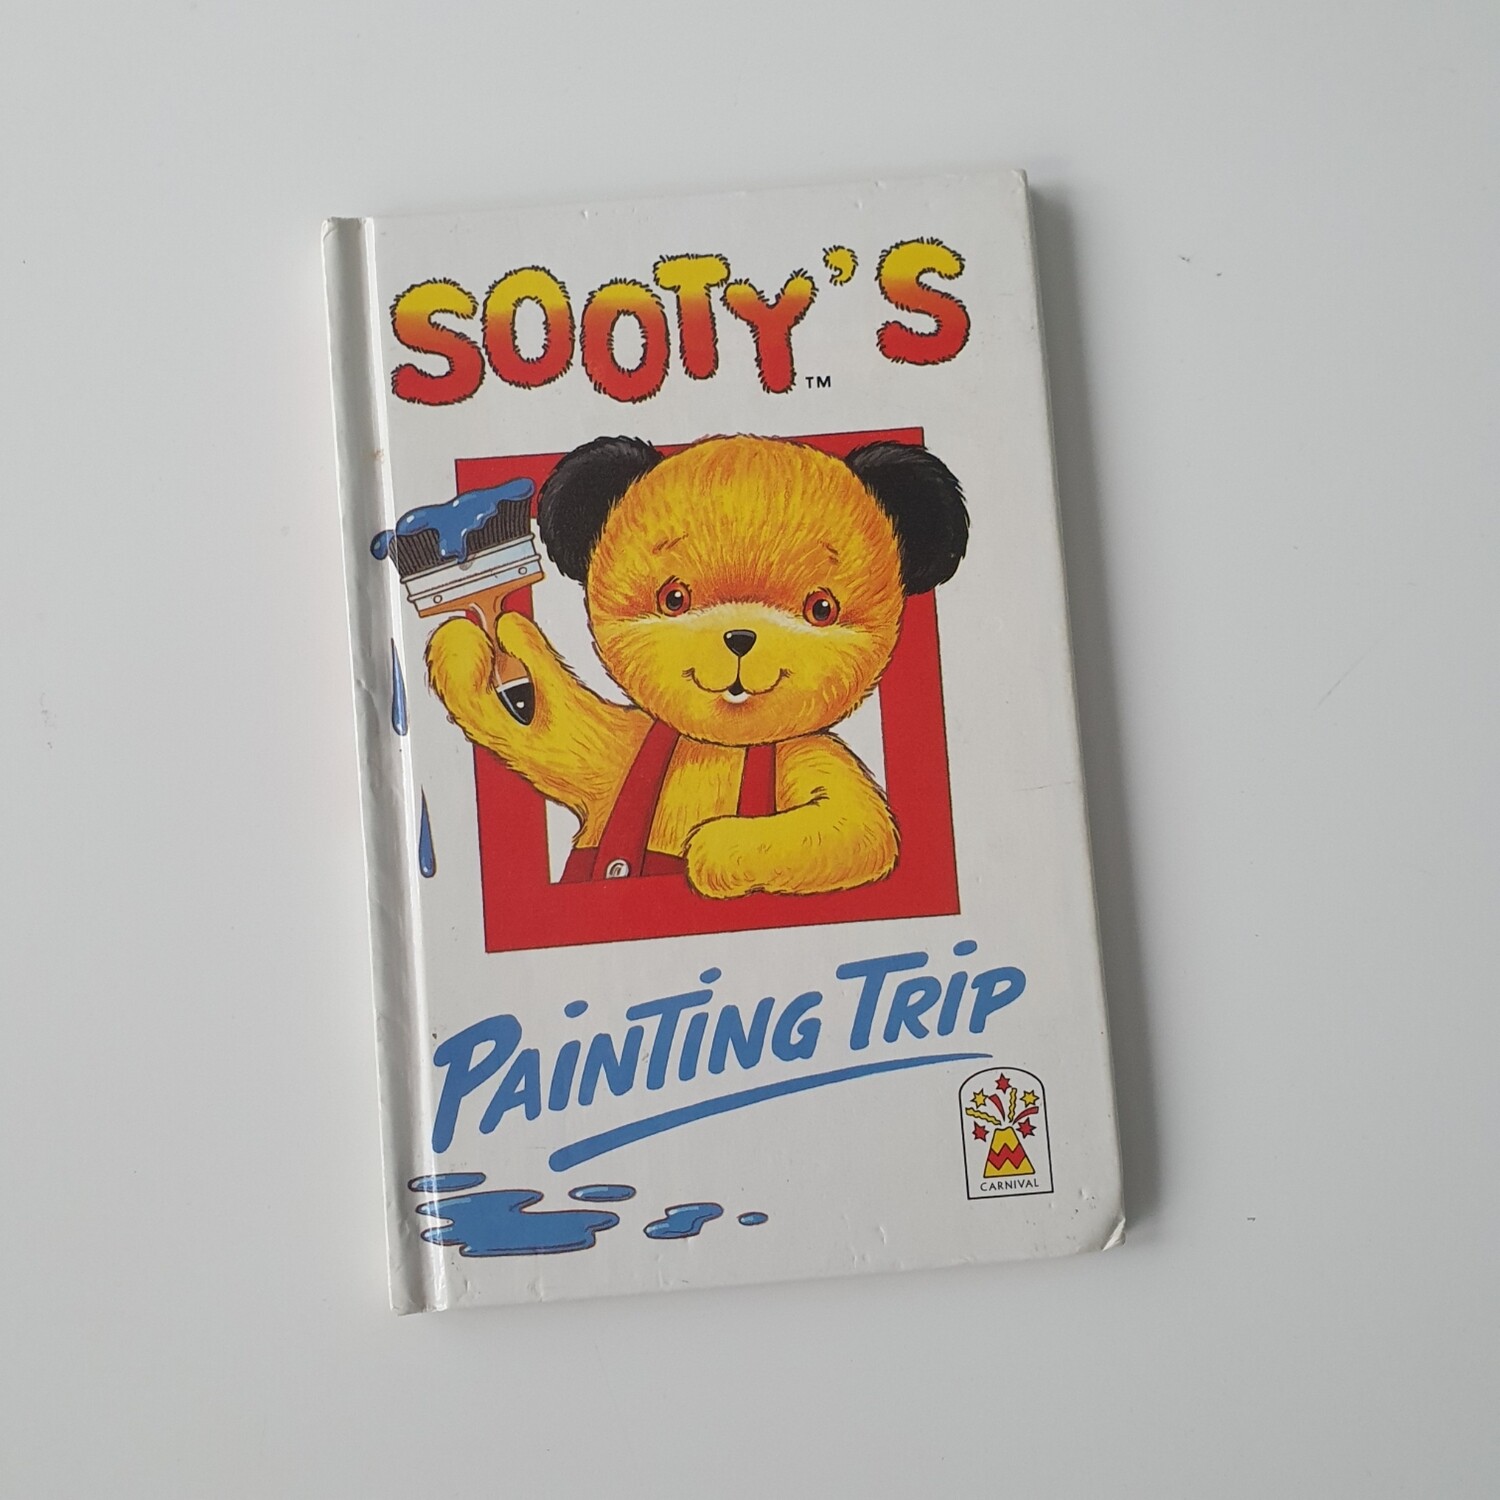 Sooty - Painting Trip